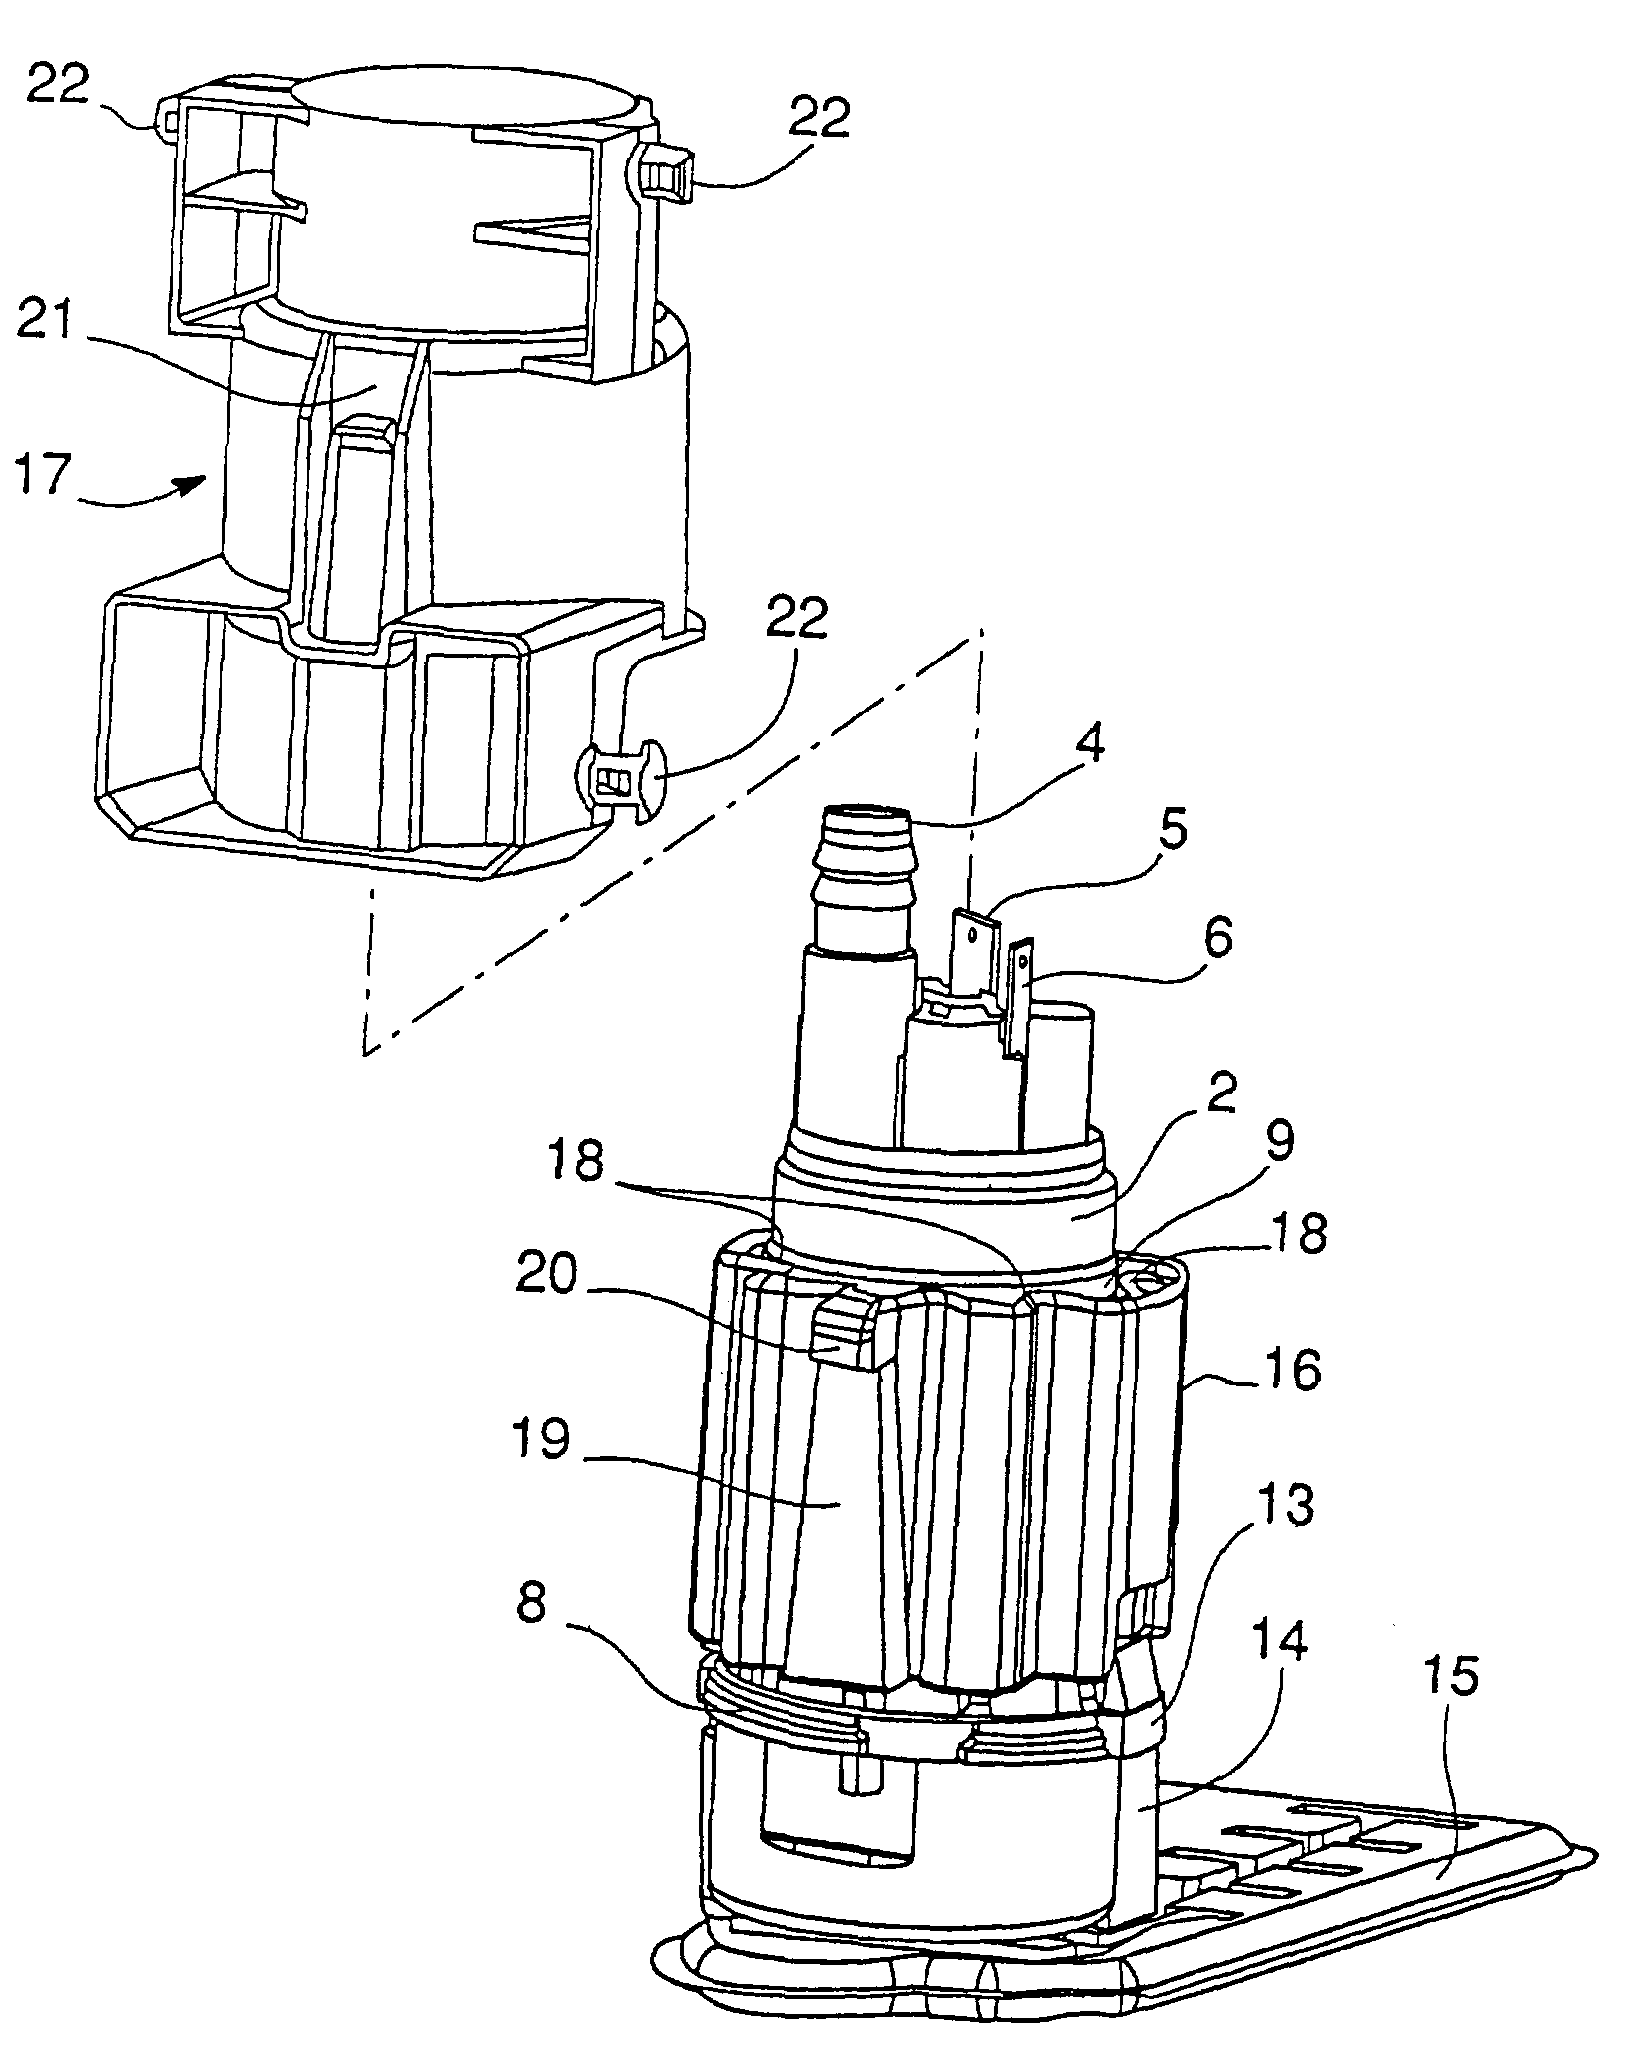 Process for assembly of an electric pump, and a vibration damper for such a pump